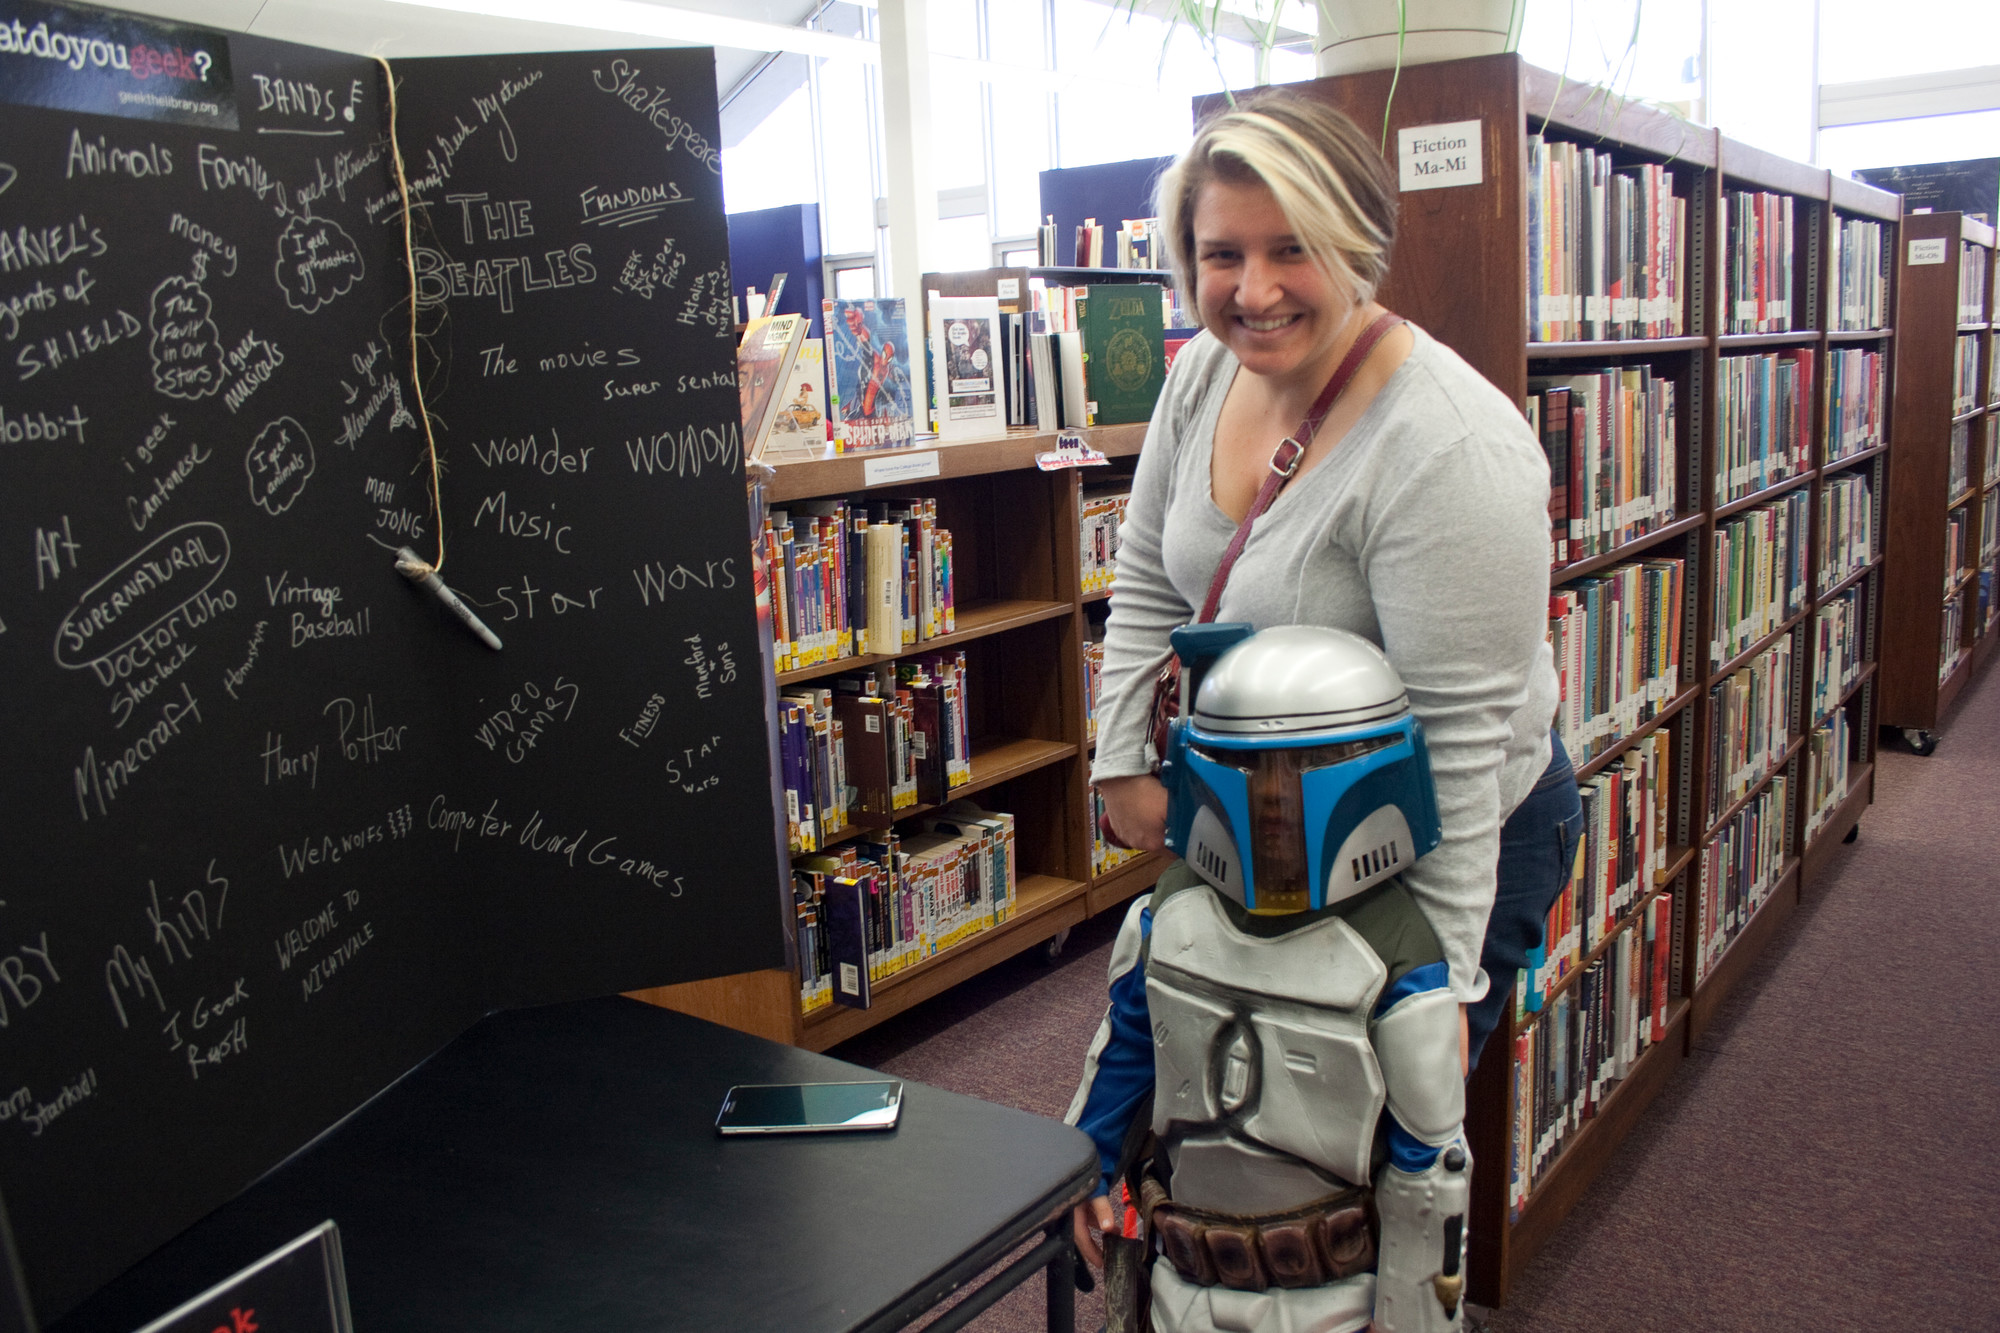 Jeanette and Marco Cigliano wrote what they “geek” on the library’s board: Star Wars.